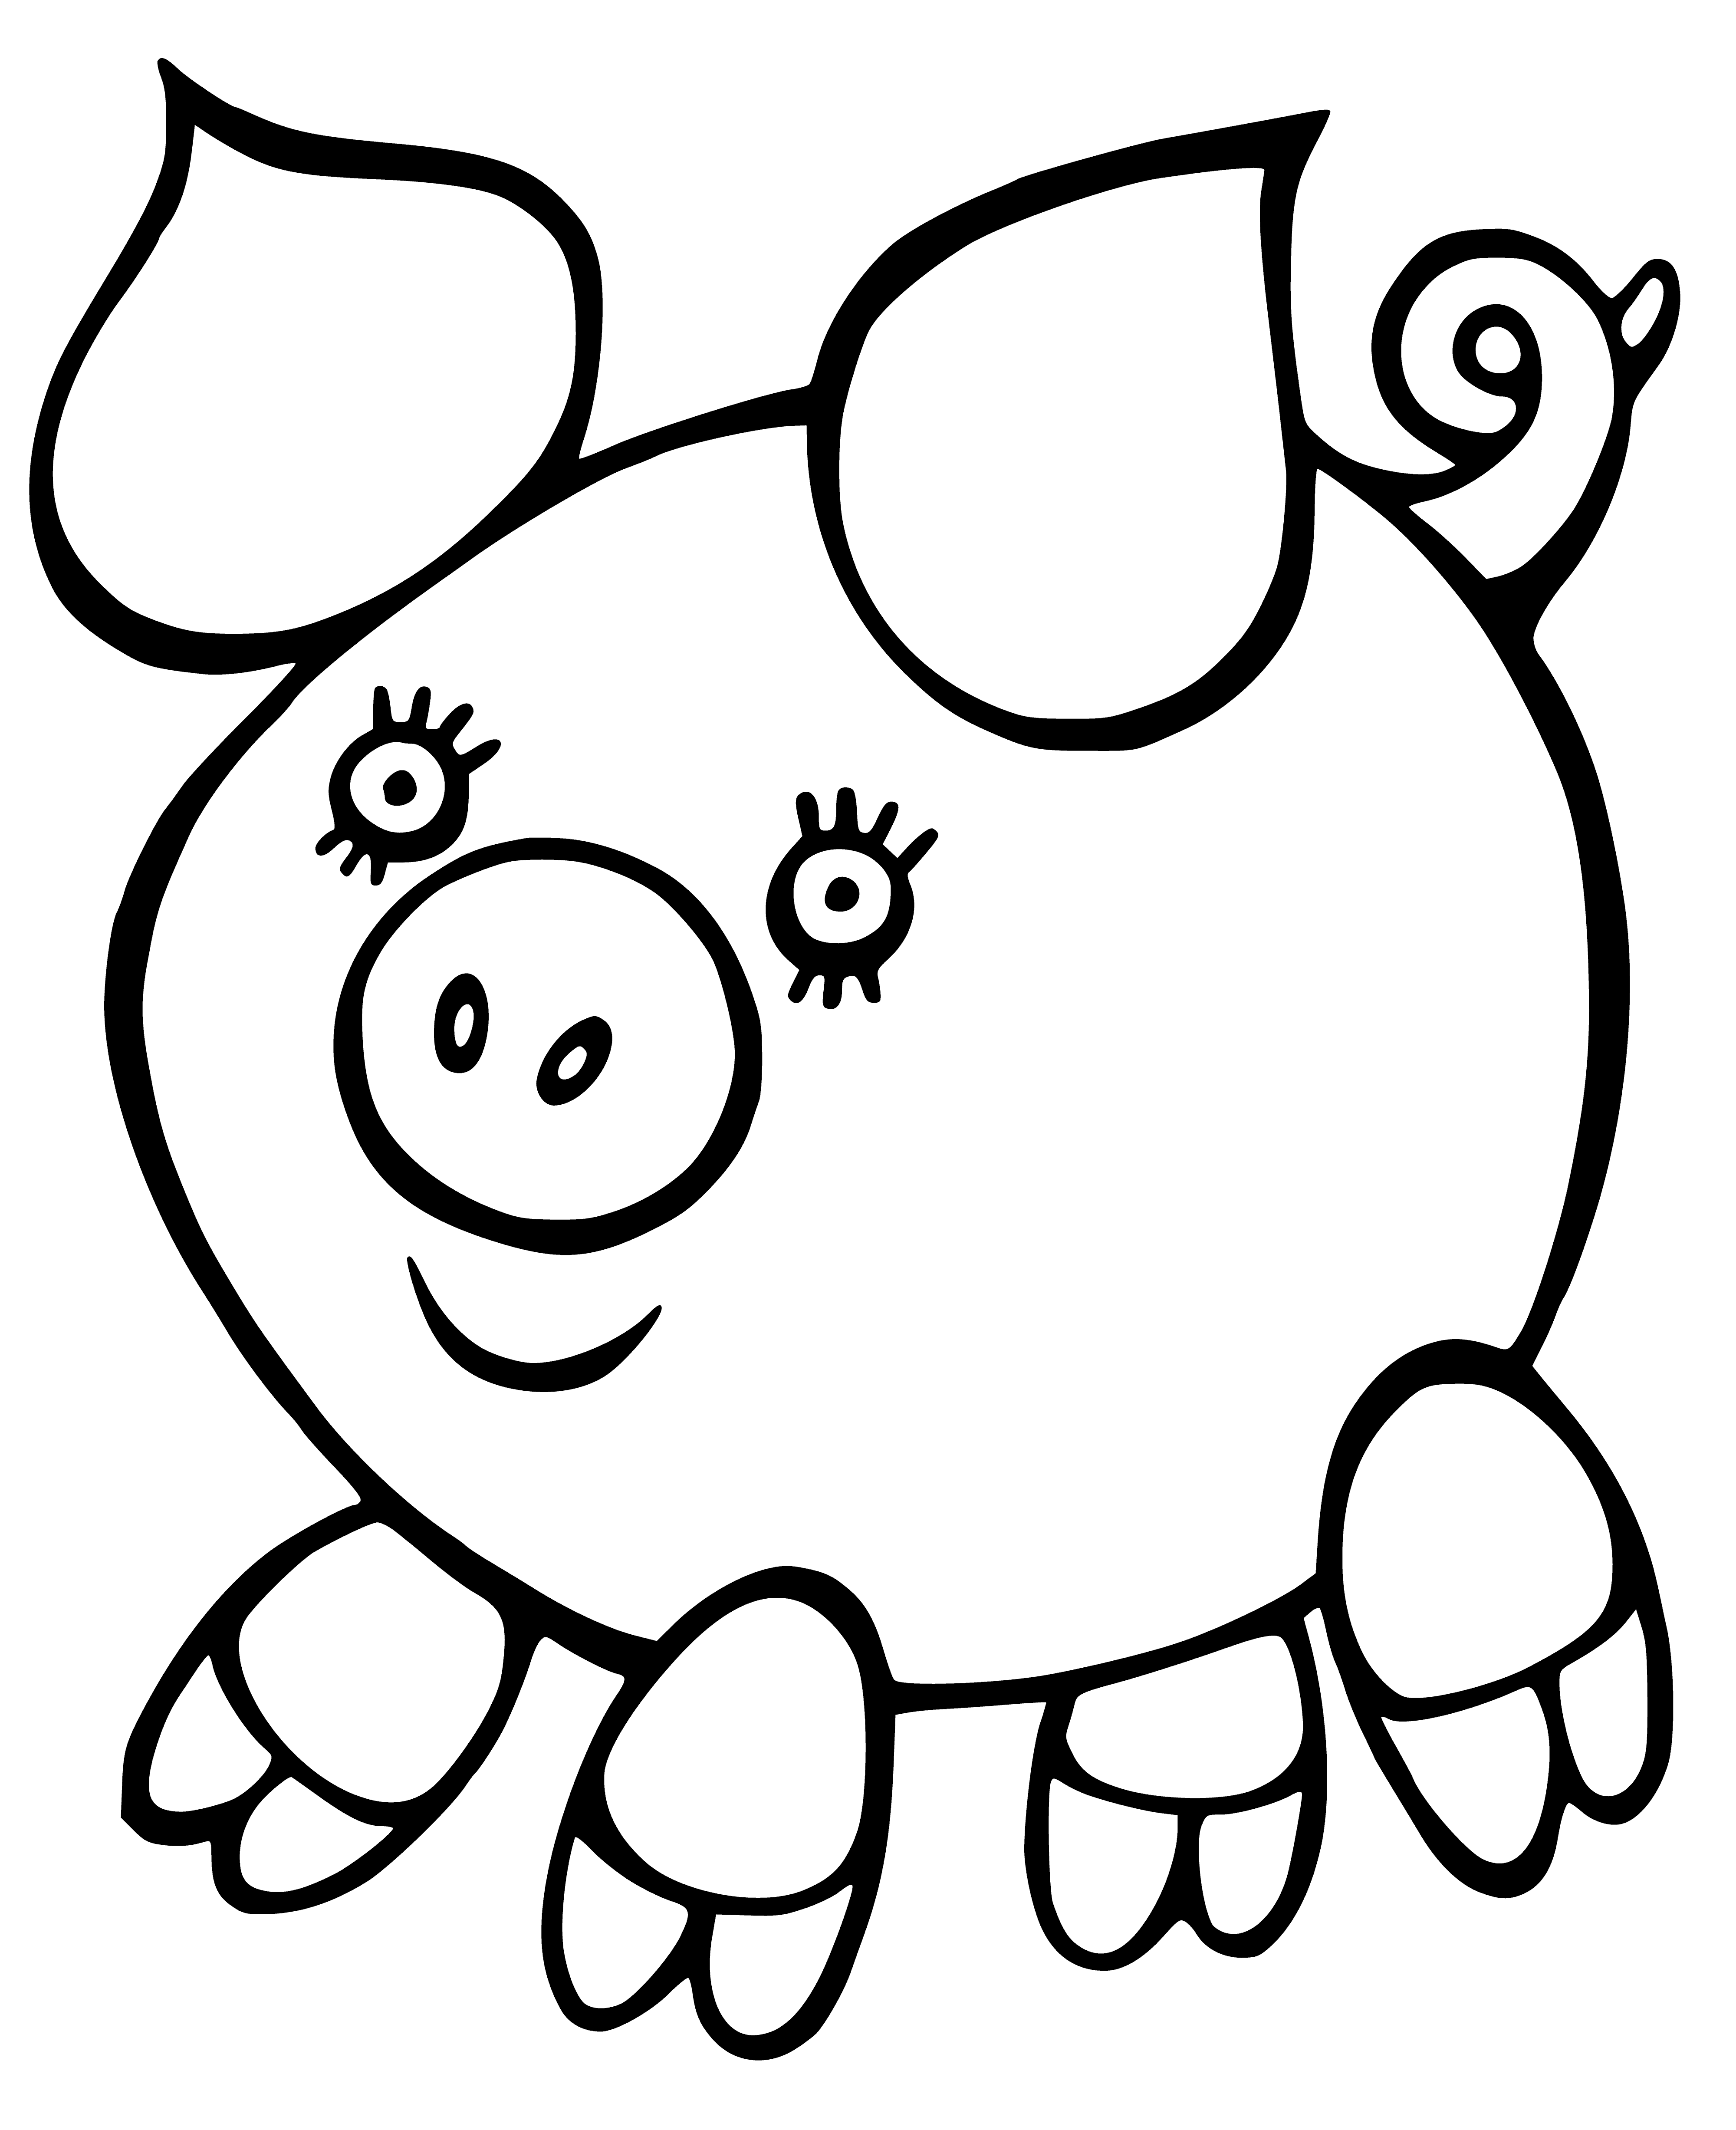 coloring page: Pigs are plump, pink farm animals with snouts, 4 hooves, & mostly eat plants. Some people keep them as pets.